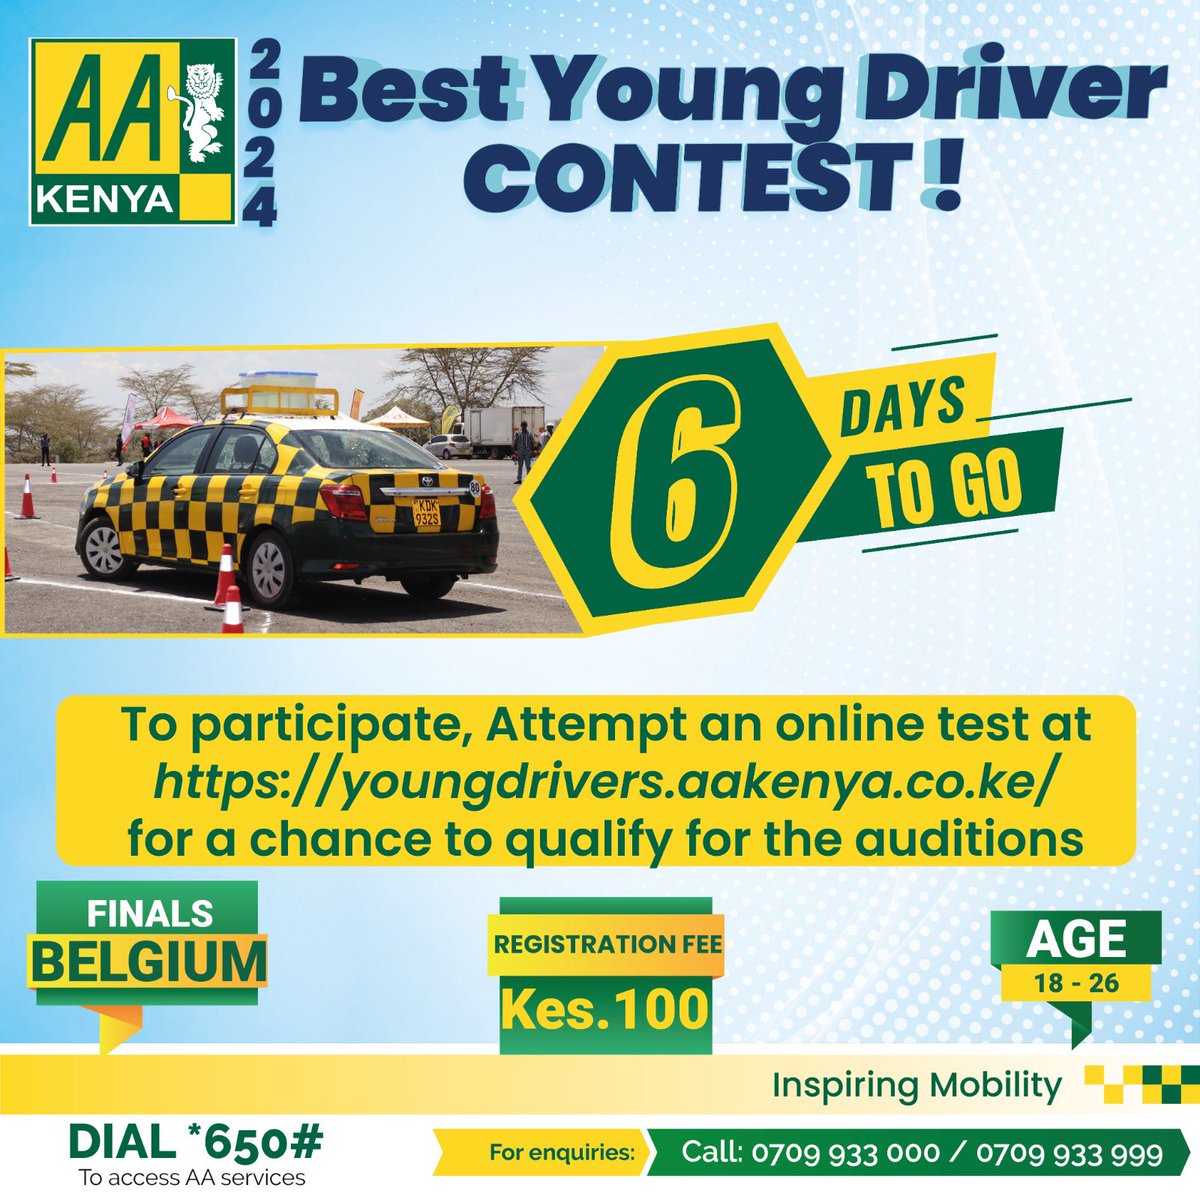 The deadline for the Best Young Driver Contest registrations is in 6 days! Have you attempted the online test? Don’t miss out, register at youngdrivers.aakenya.co.ke to qualify for the practical auditions. #AAKenyacares #BestYoungDriver2024